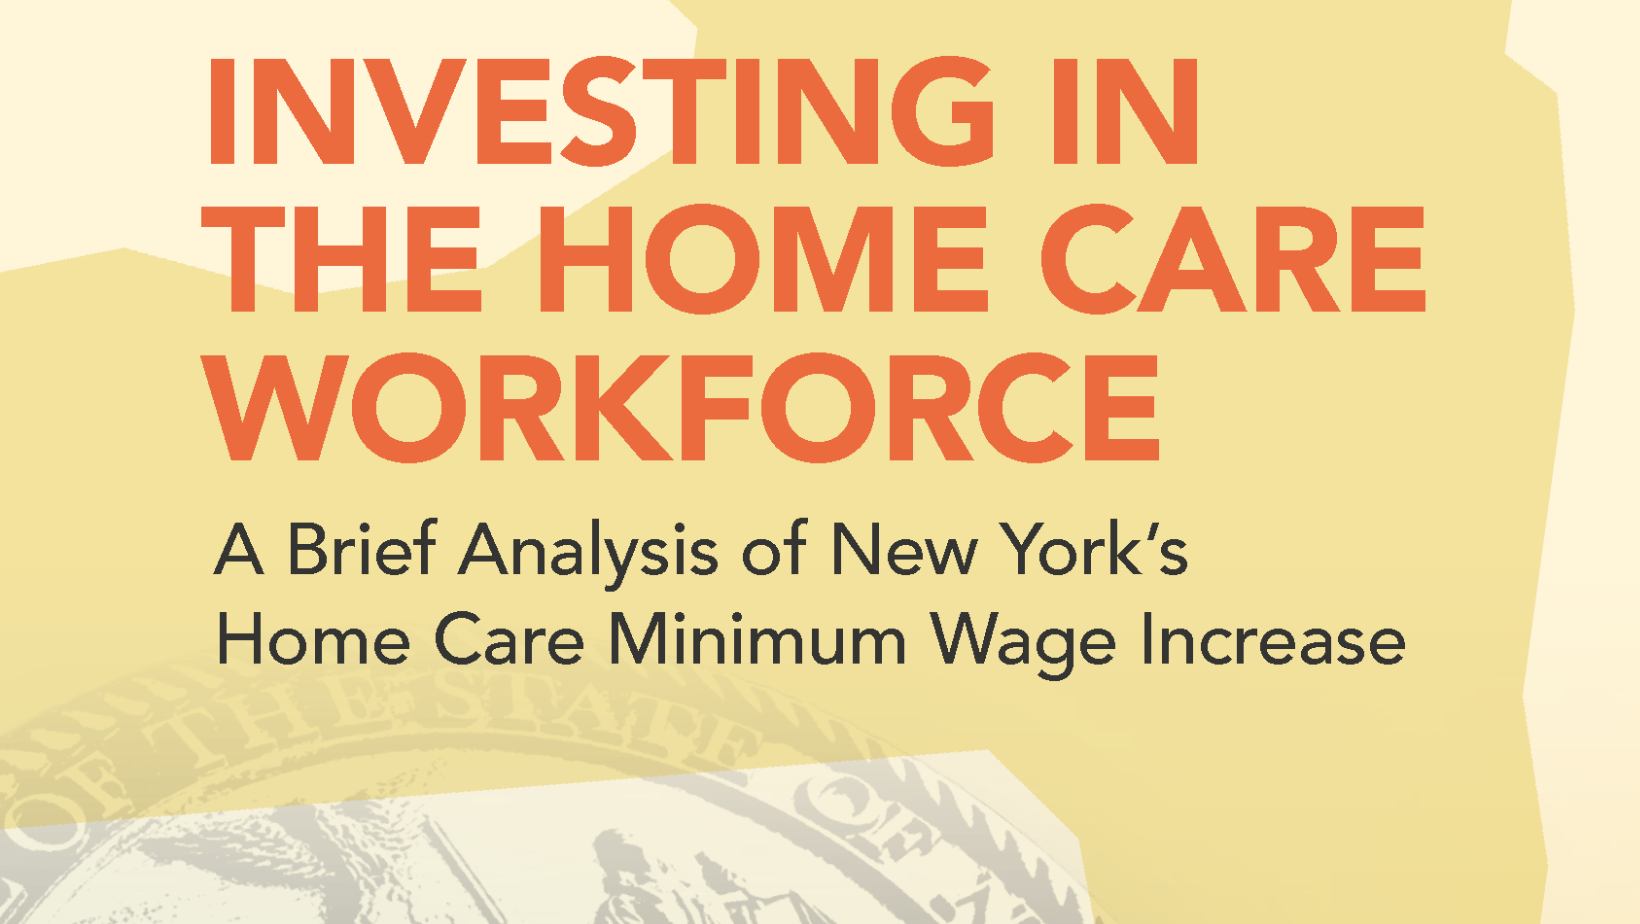 Investing in New York's Home Care Workforce: Progress and Challenges in Raising Wages